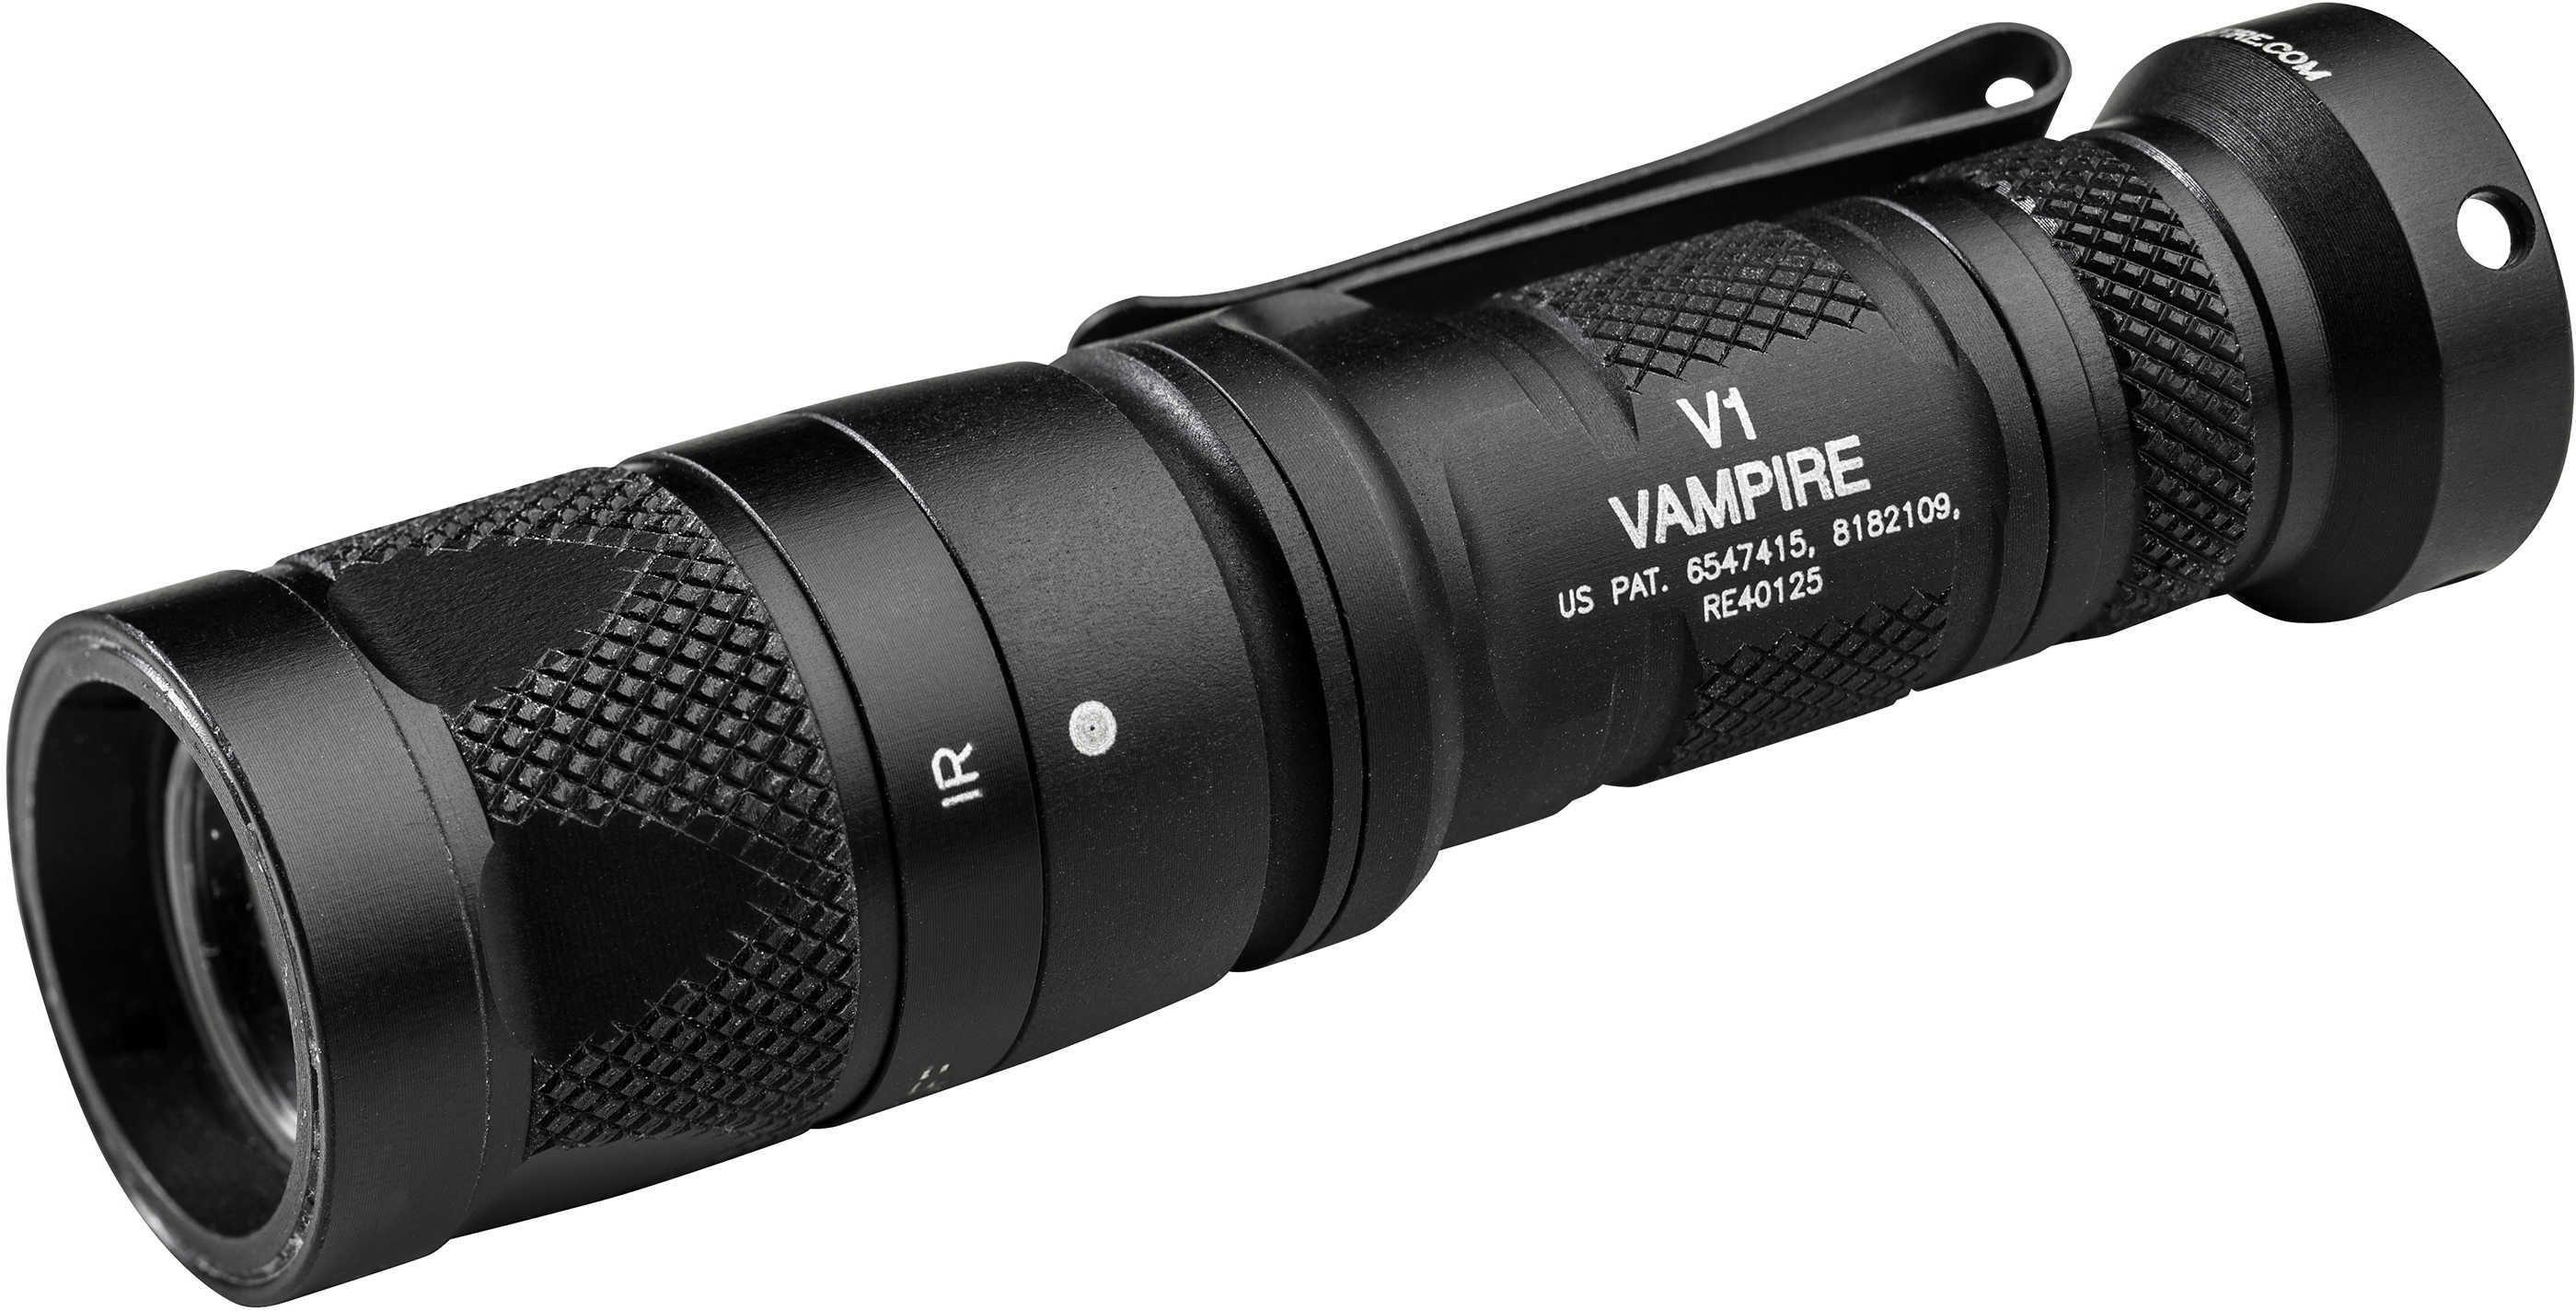 Surefire V1 Vampire Flashlight Dual Output 5/250 LED 10/100mW IR Constant-On Click-Type/ Tactical Momentary-On Tail Blac